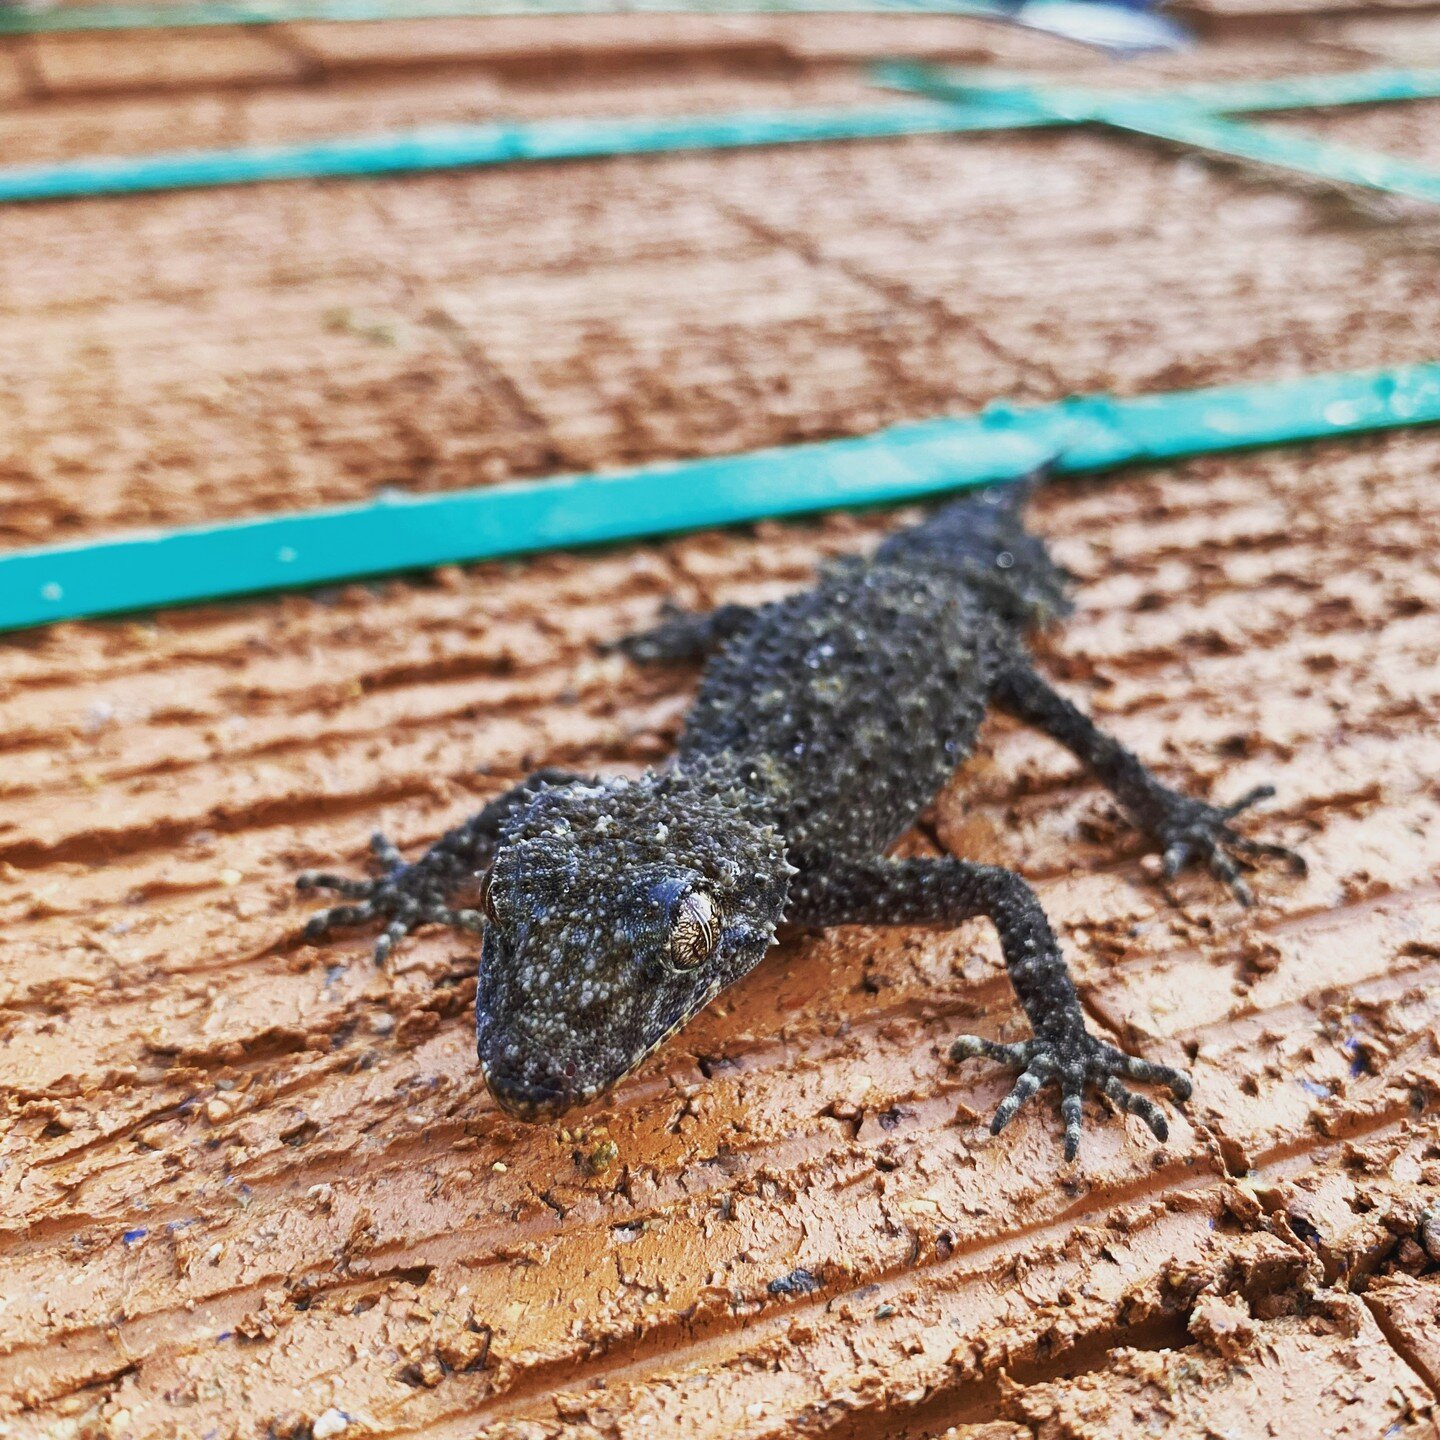 We often get locals stopping by to check out some of our awesome work. This Broad Tailed Gecko found himself on one of our jobs during the week #nature #nativeanimalsofaustralia